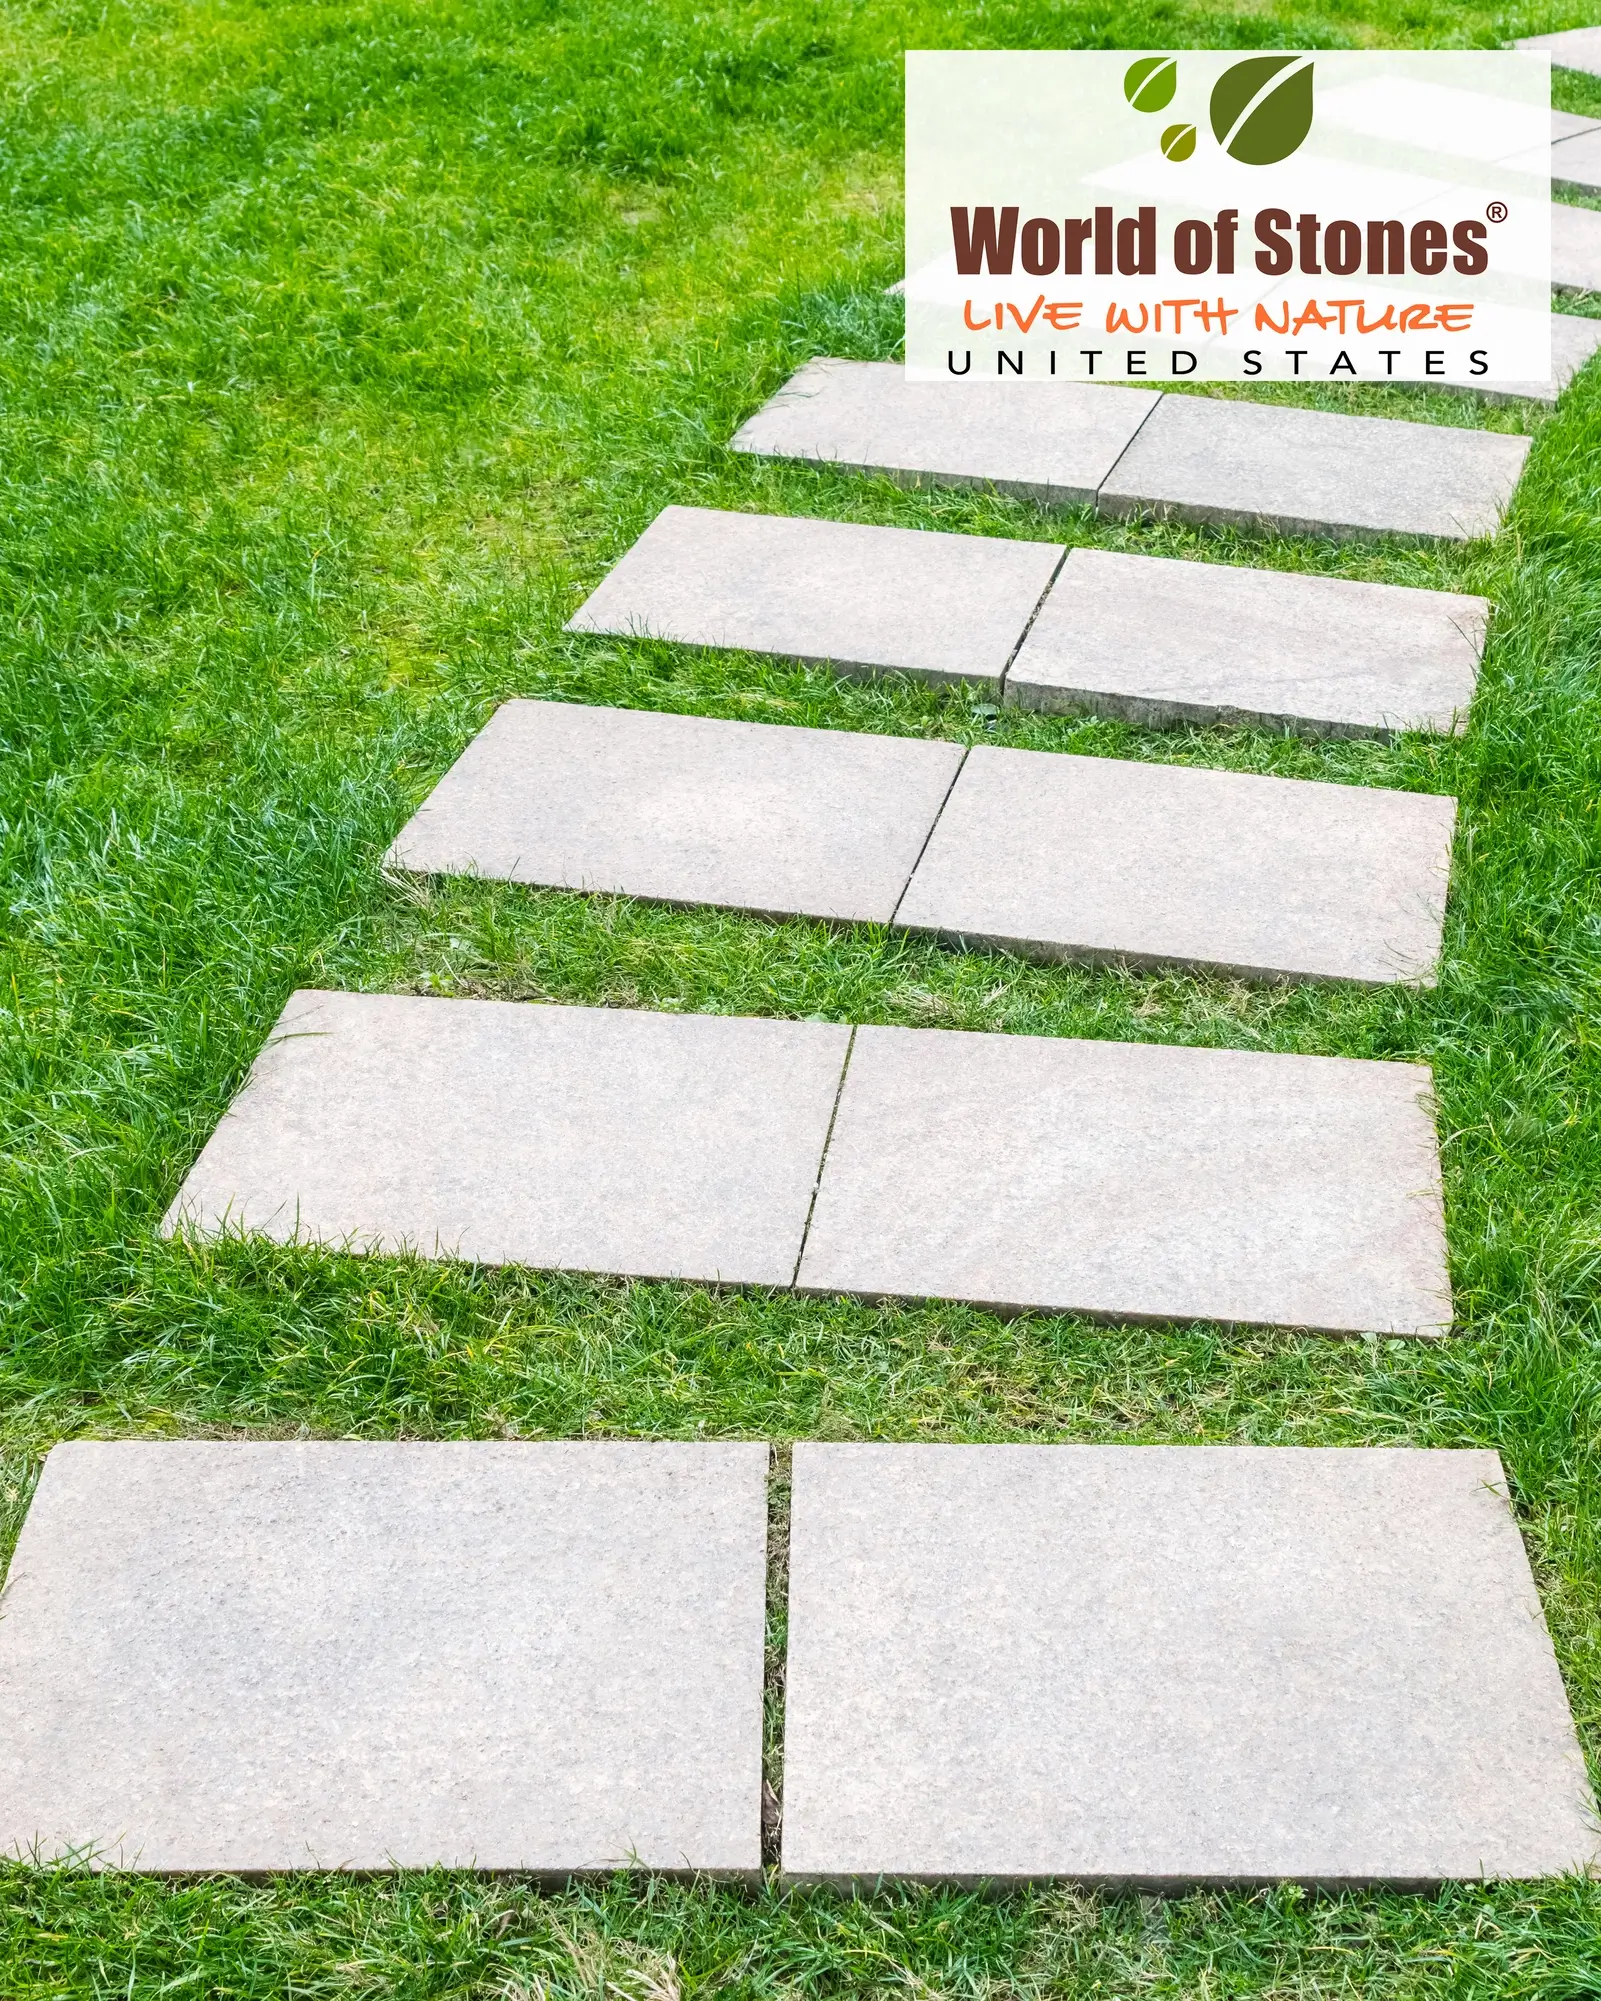 How to Make Stepping Stones from Concrete [9 Simple Steps]